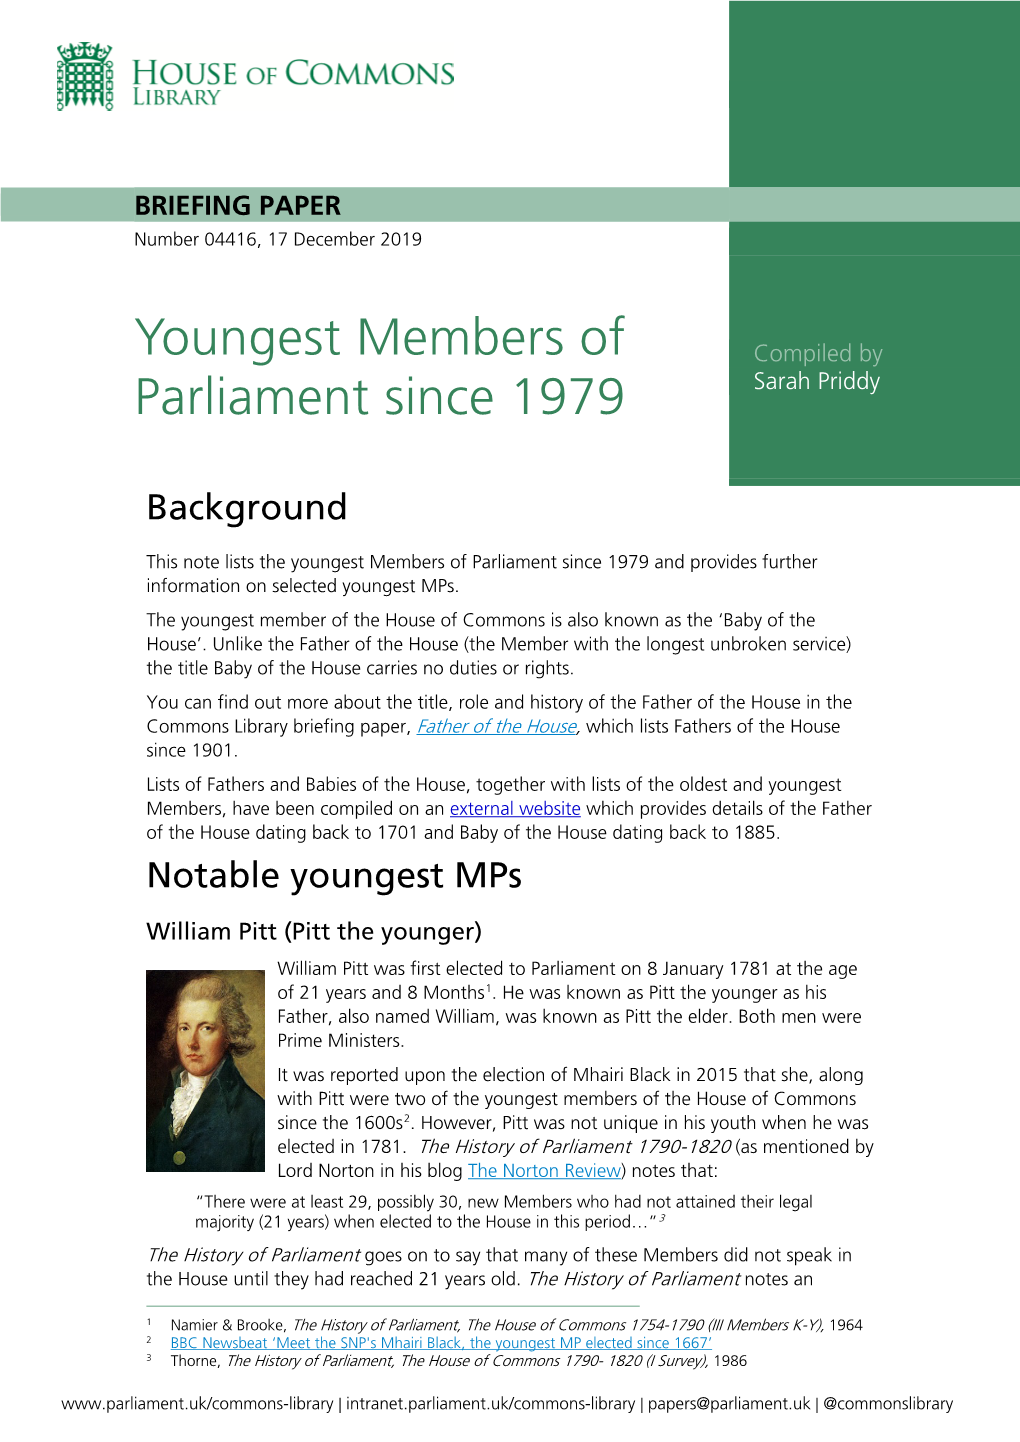 Youngest Members of Parliament Since 1979 and Provides Further Information on Selected Youngest Mps